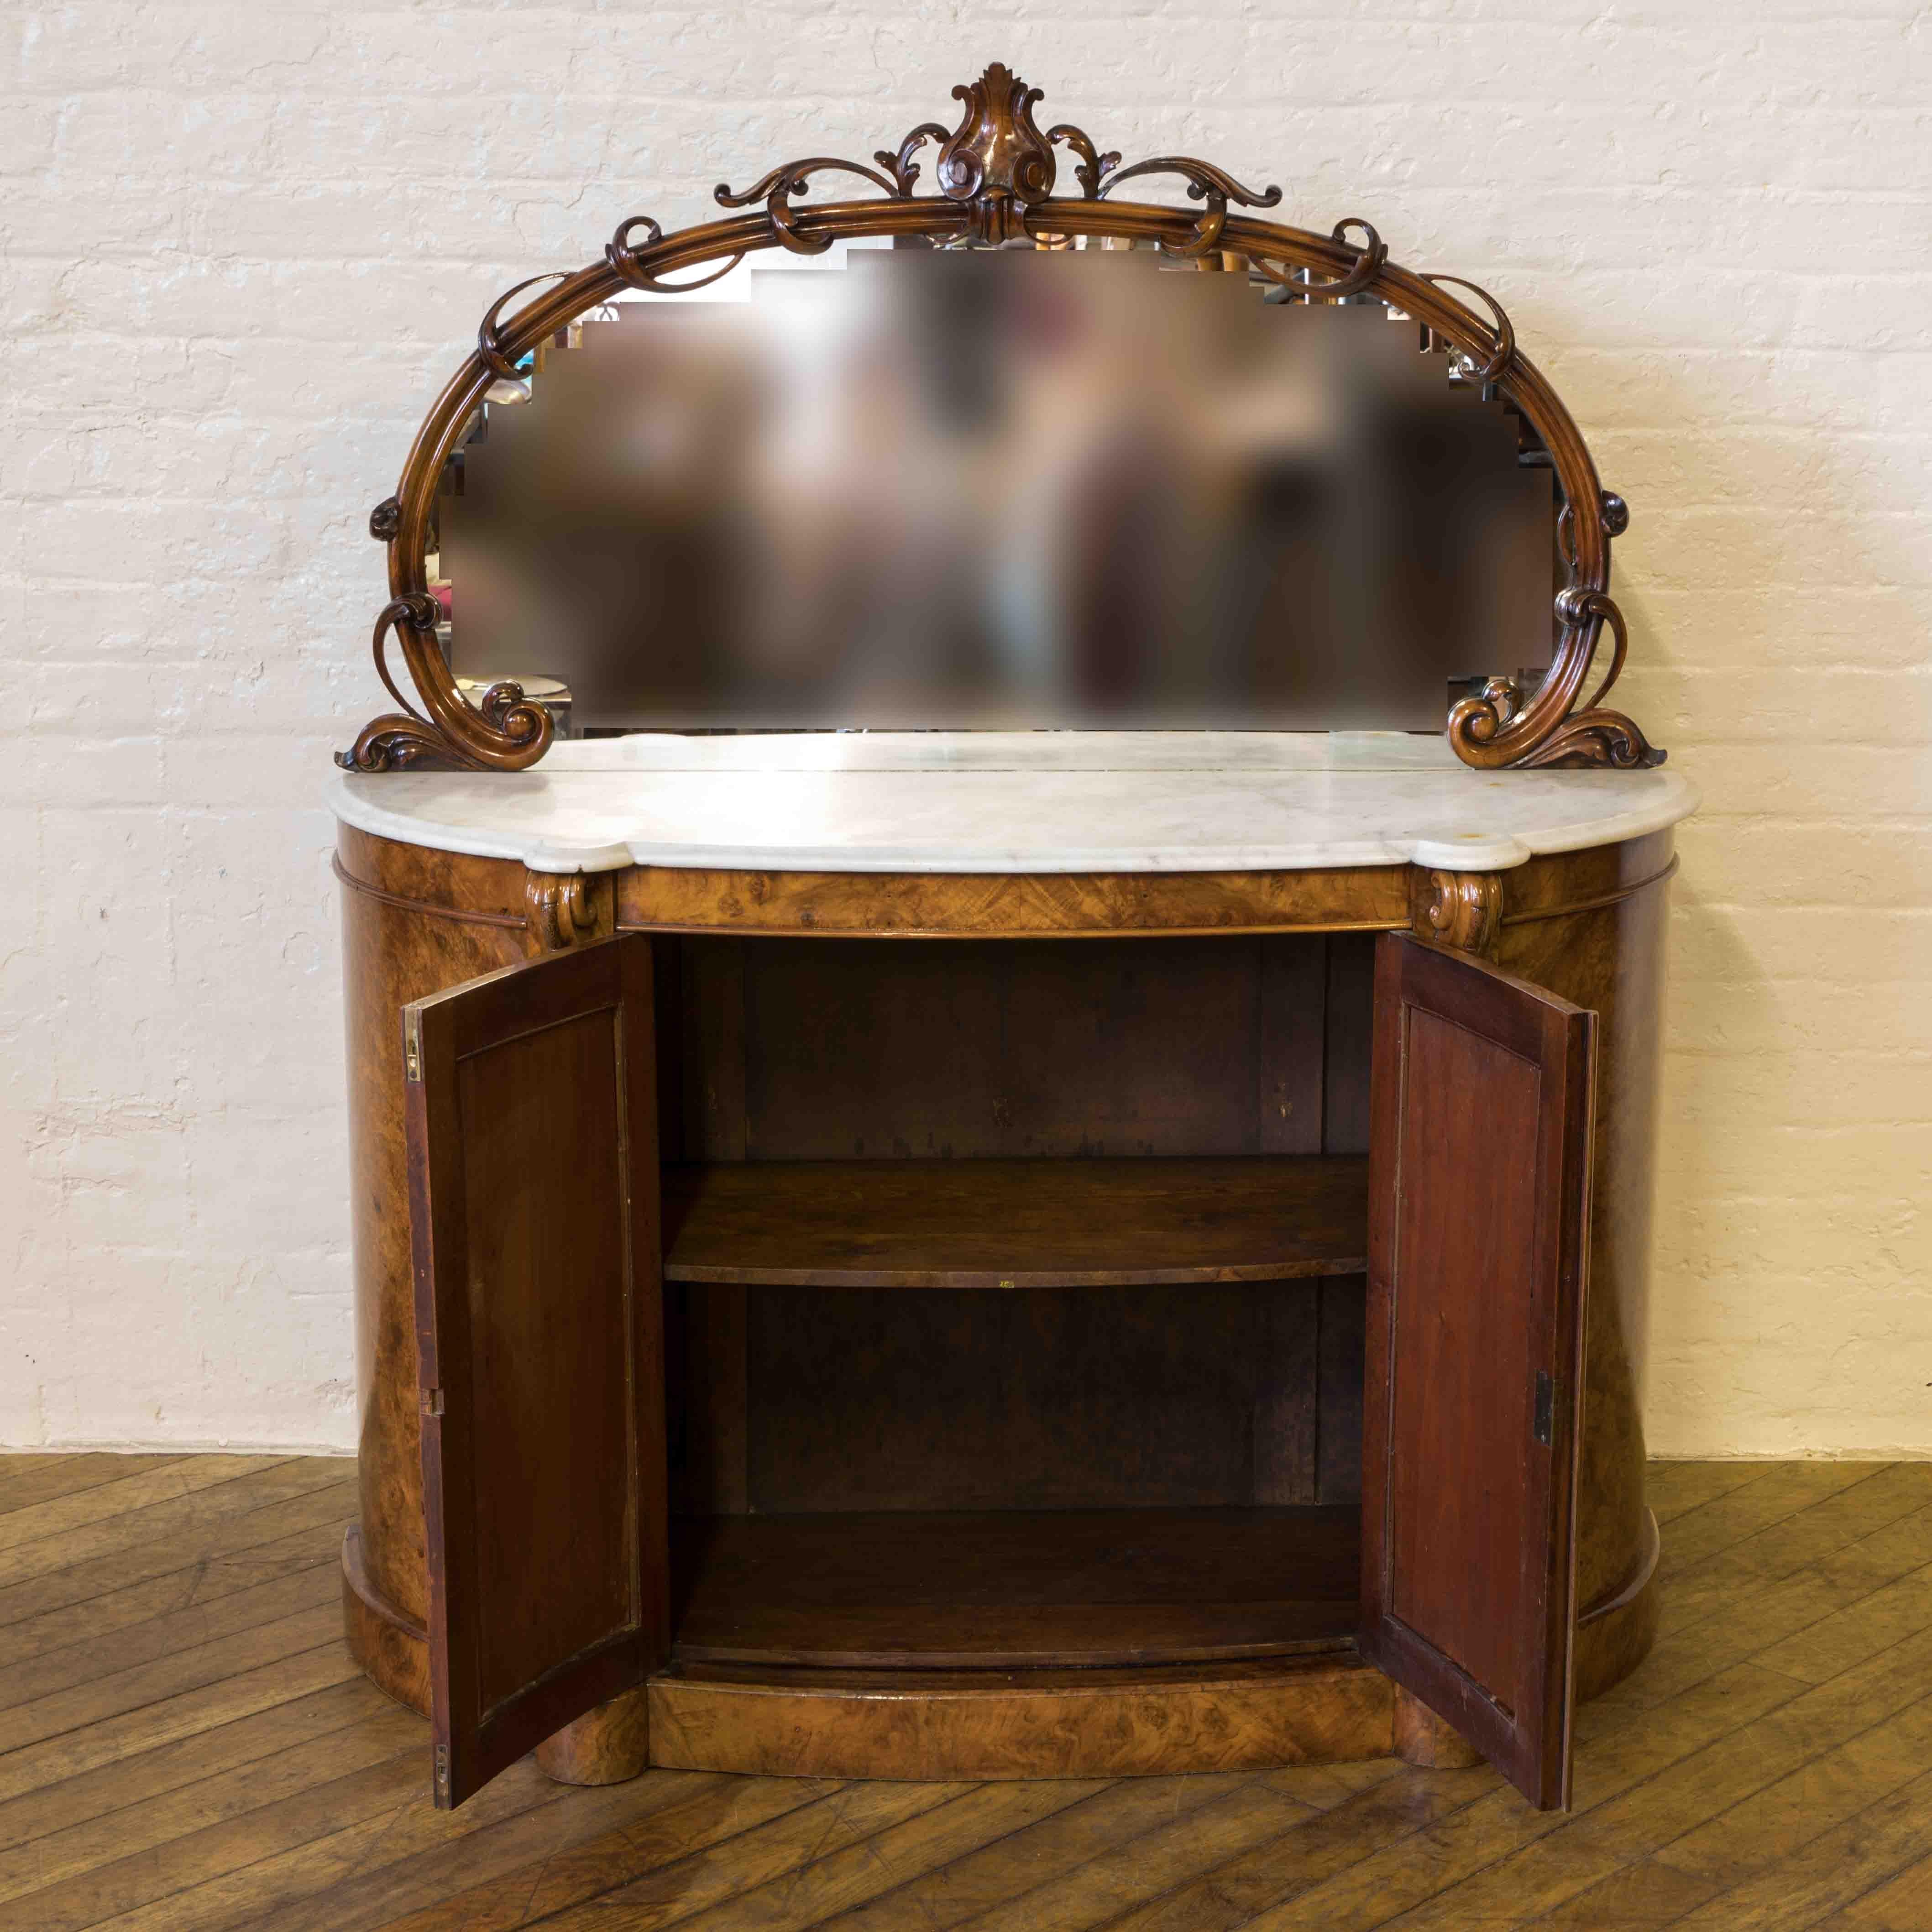 A beautiful Victorian burr walnut chiffonier with wonderful fretted doors to the base complete with working lock and key. The original marble top has no cracks or chips and the intricate craved foliate frame to the mirror back is also in super